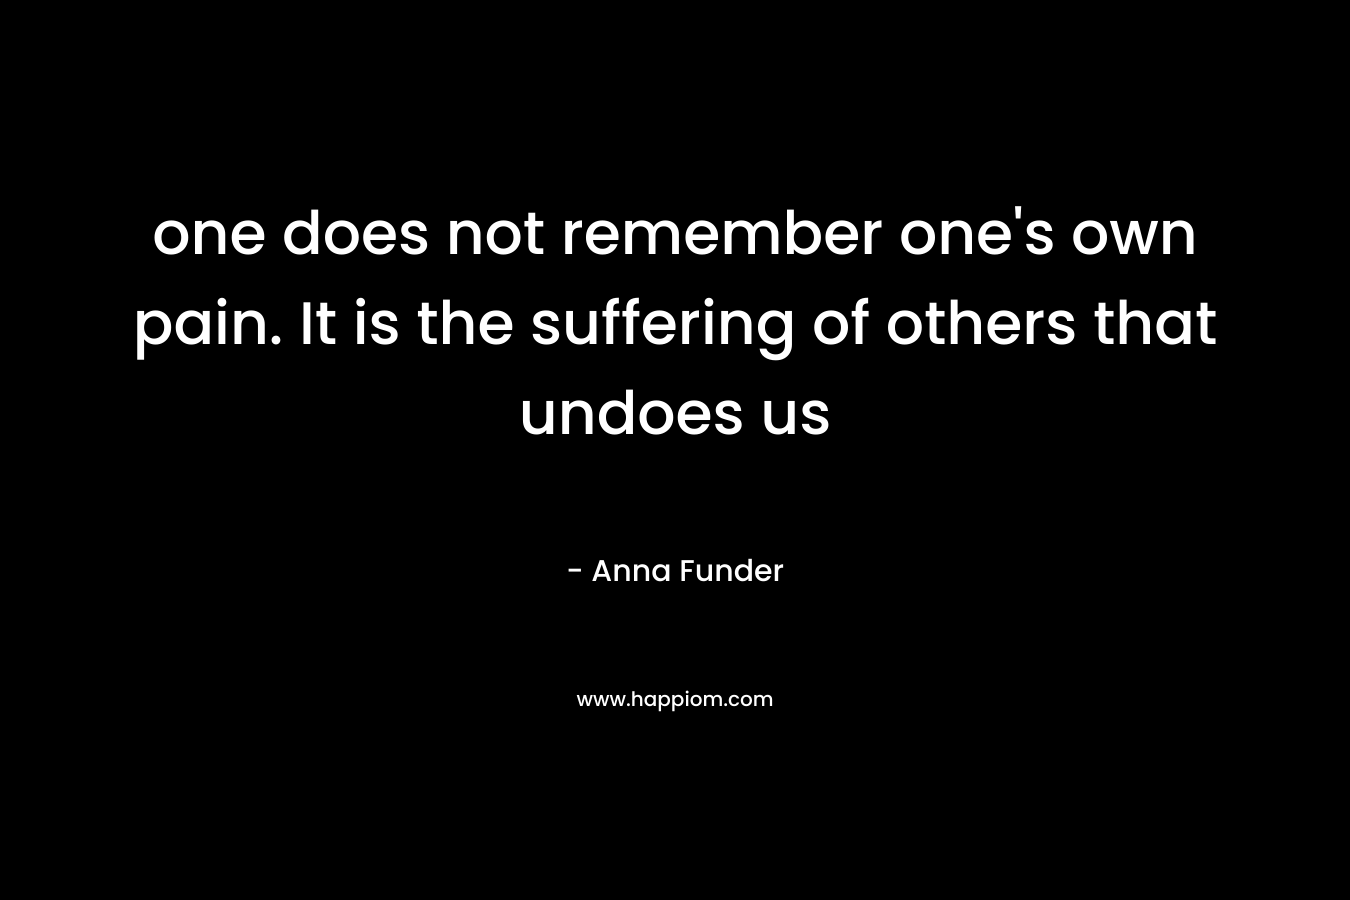 one does not remember one's own pain. It is the suffering of others that undoes us